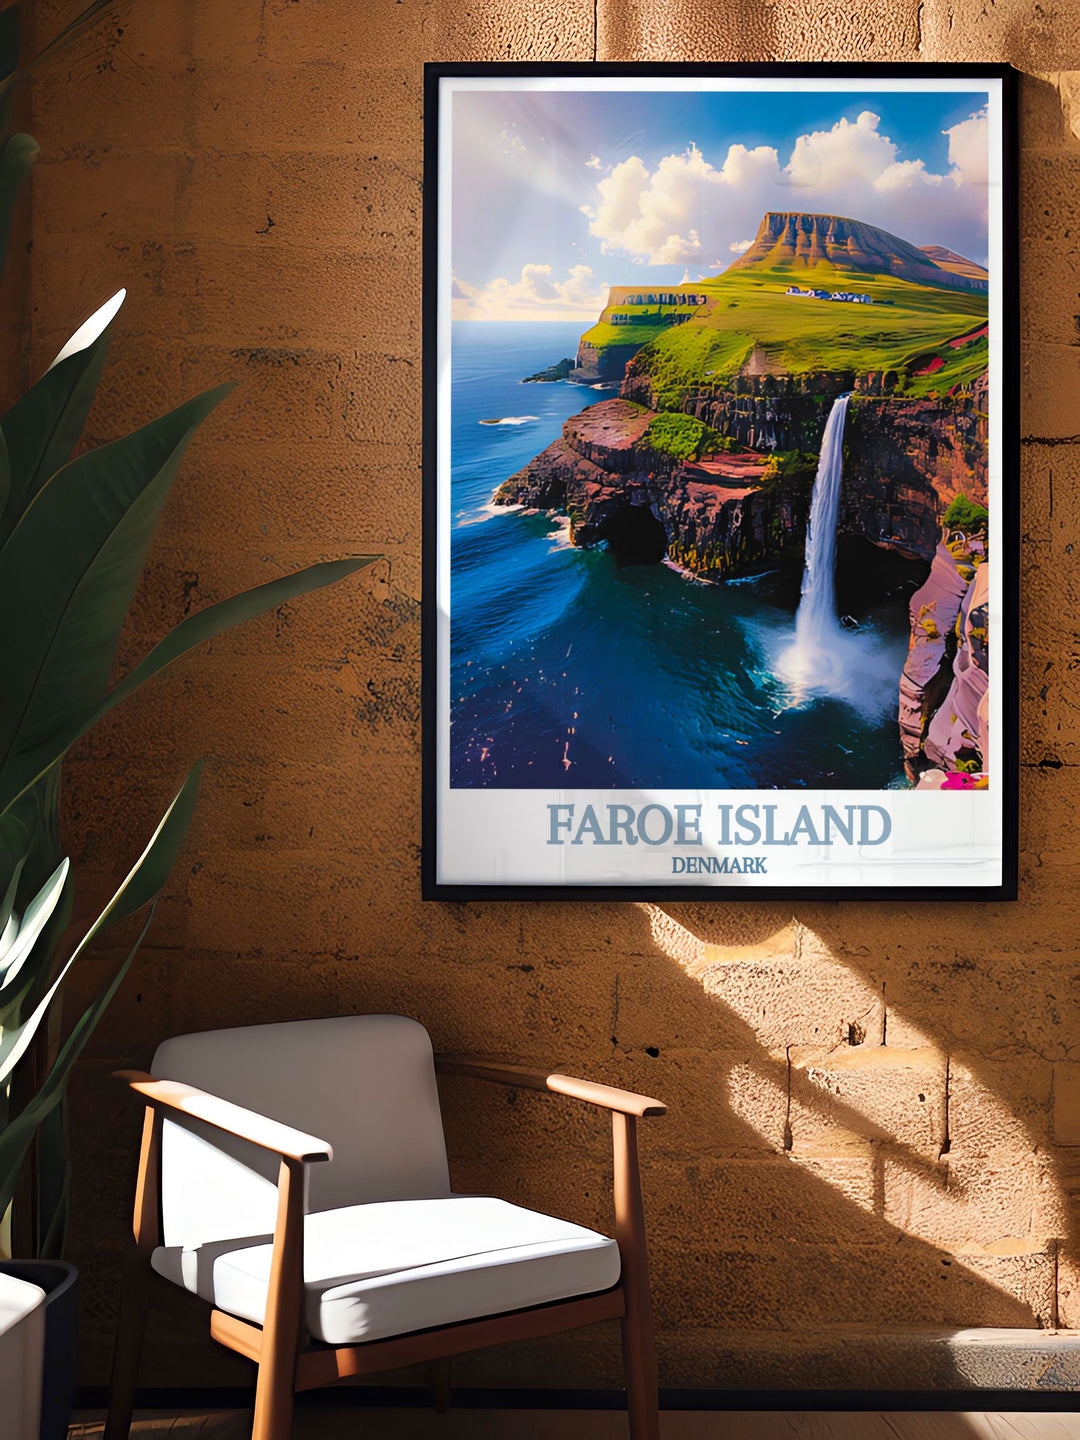 The enchanting scenery of Múlafossur Waterfall and the picturesque village of Gásadalur are beautifully illustrated in this travel poster, celebrating the natural splendor and tranquil environment of the Faroe Islands.